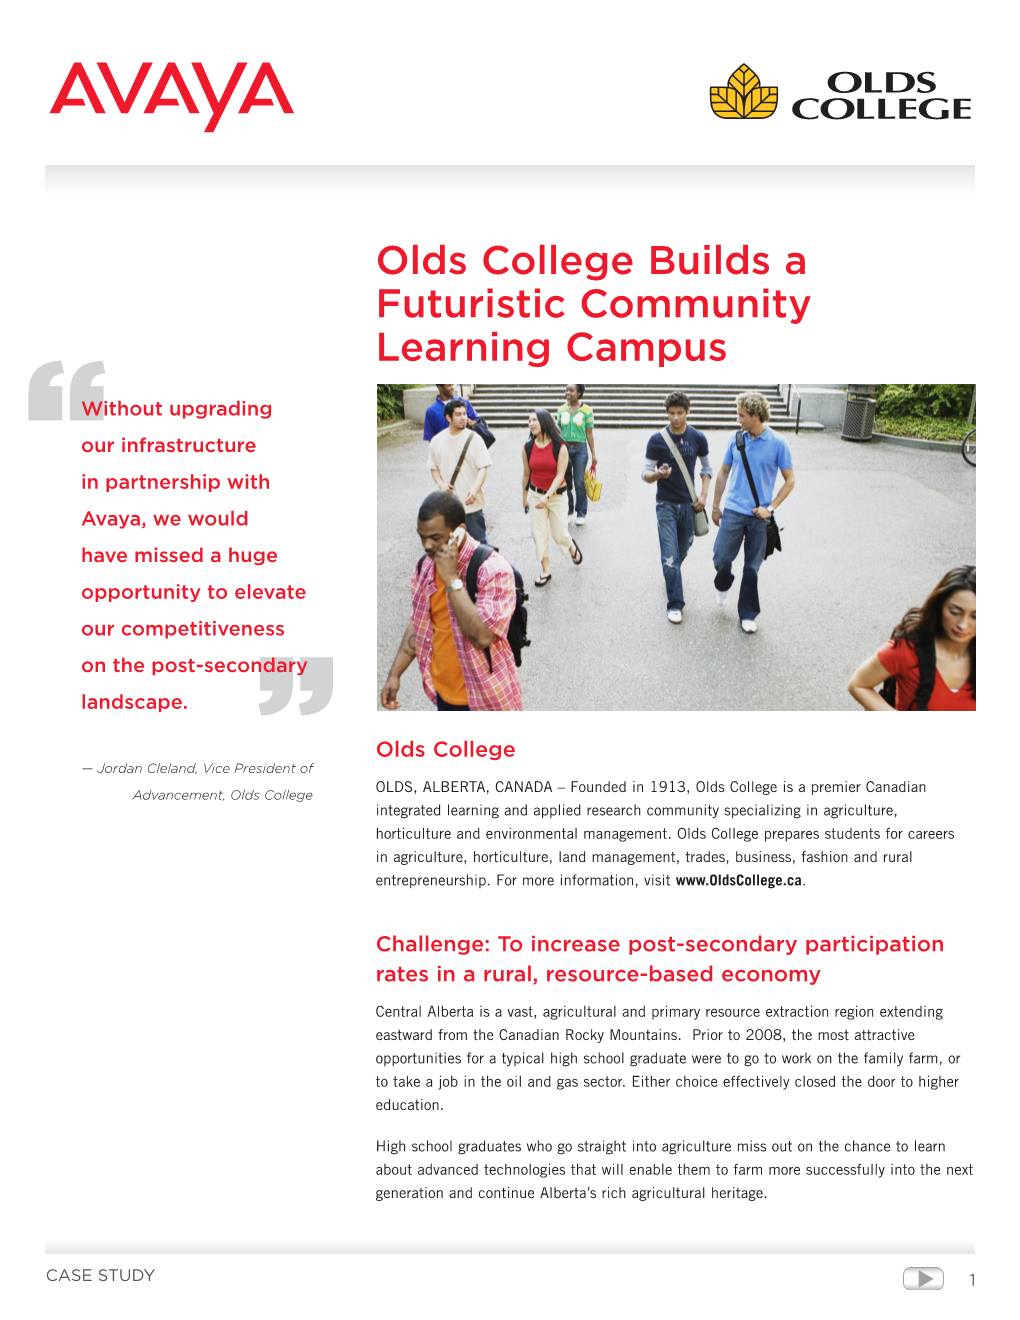 Olds College Builds a Futuristic Community Learning Campus